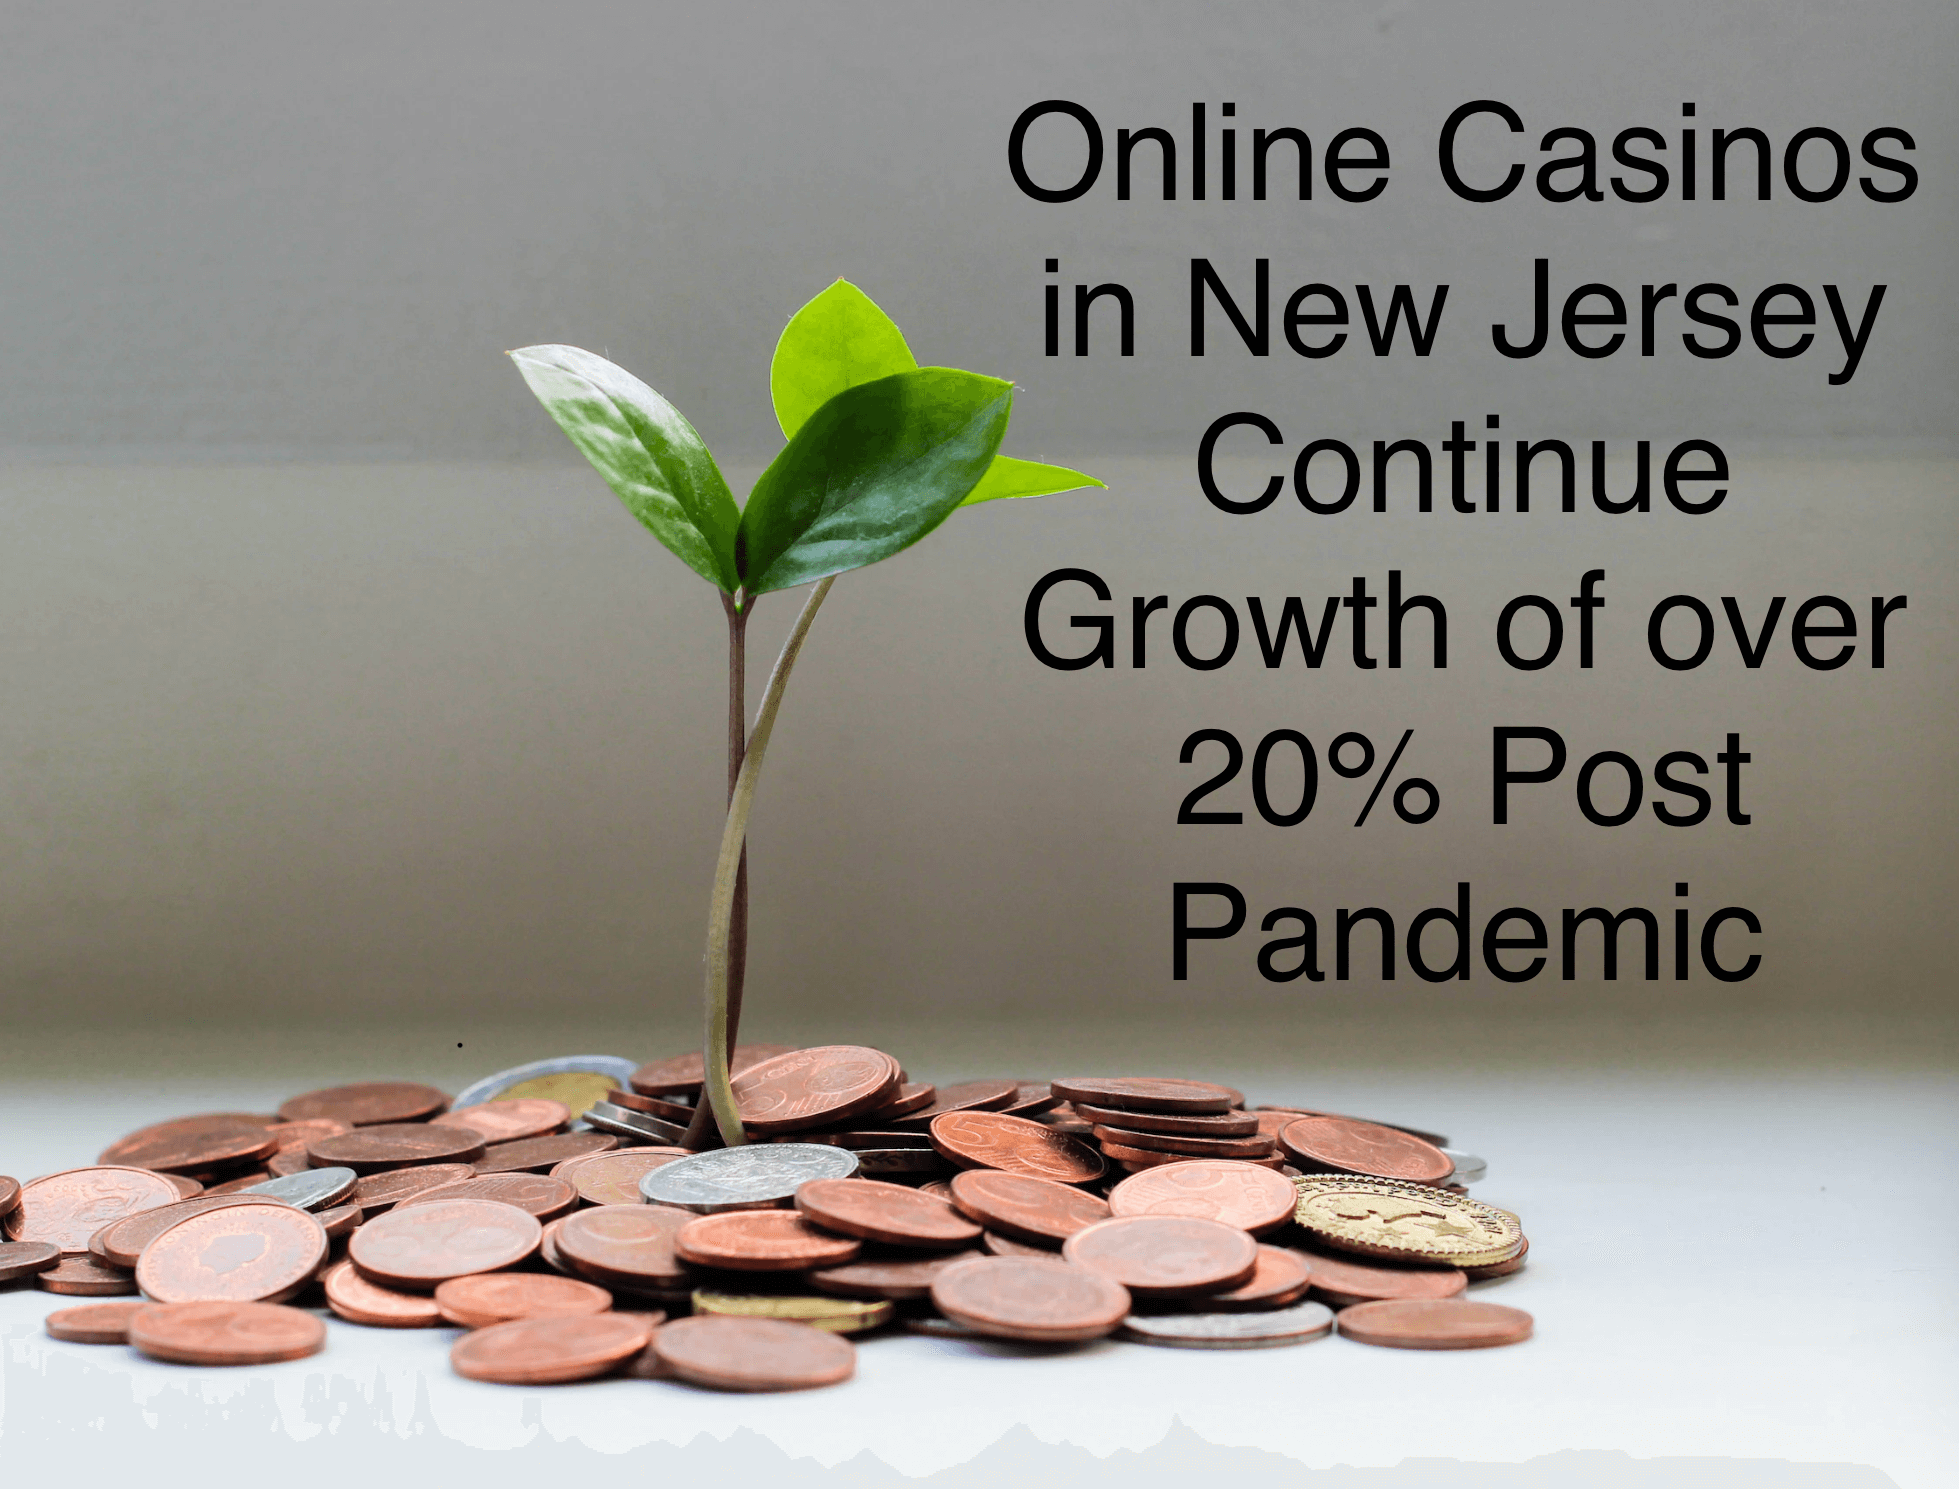 NJ Online Casinos Continue Post Pandemic Growth of Over 20%